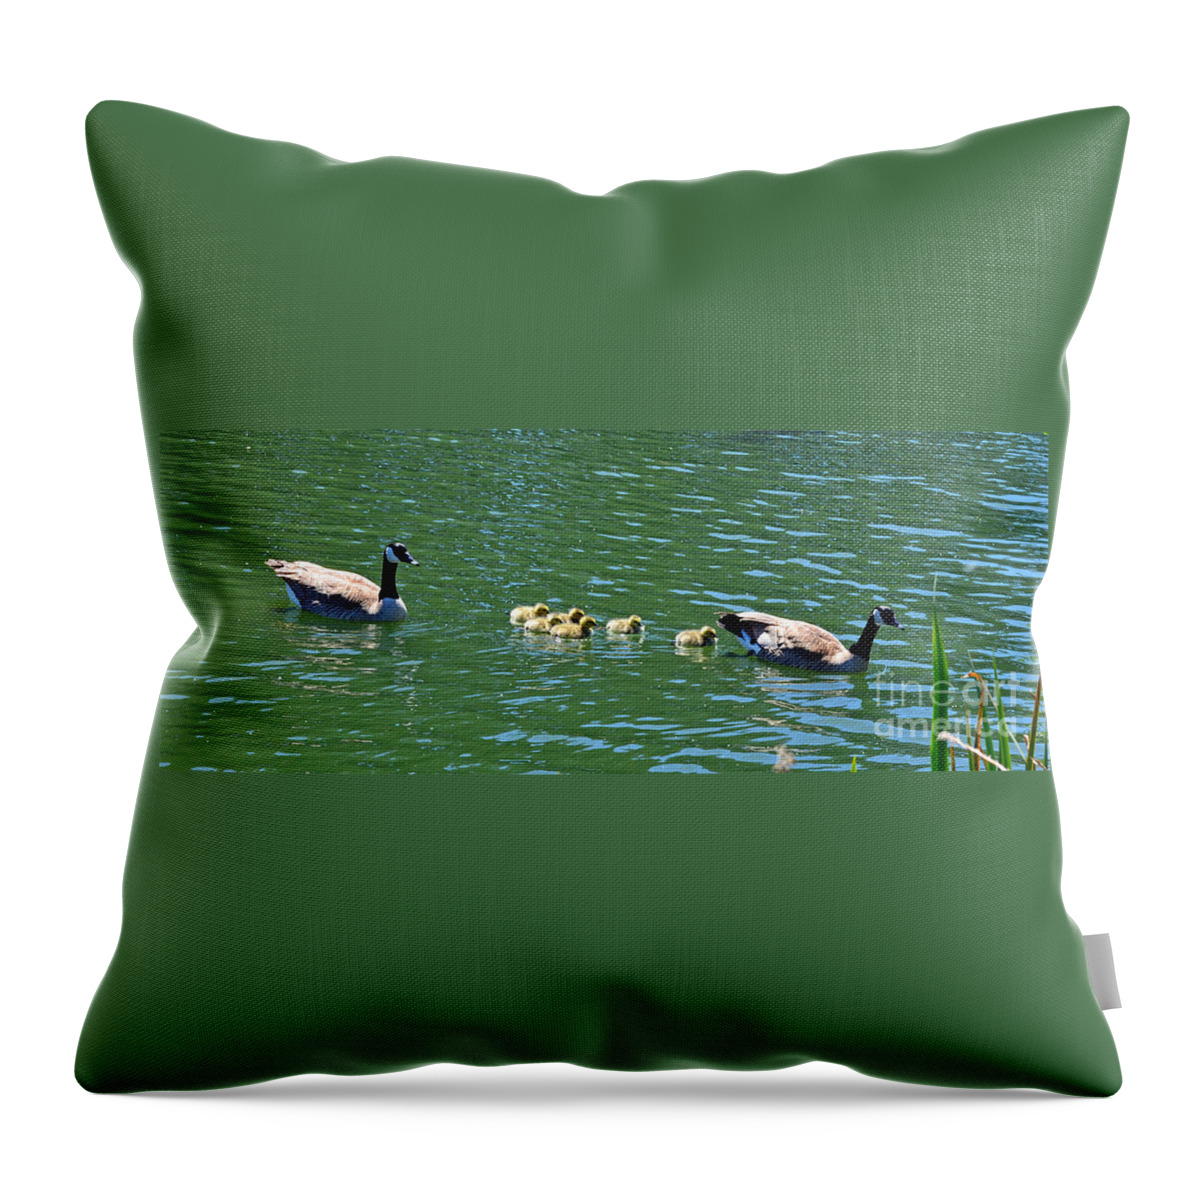 Following The Leader Throw Pillow featuring the photograph Following the Leader in Golden Gate Park by Jim Fitzpatrick